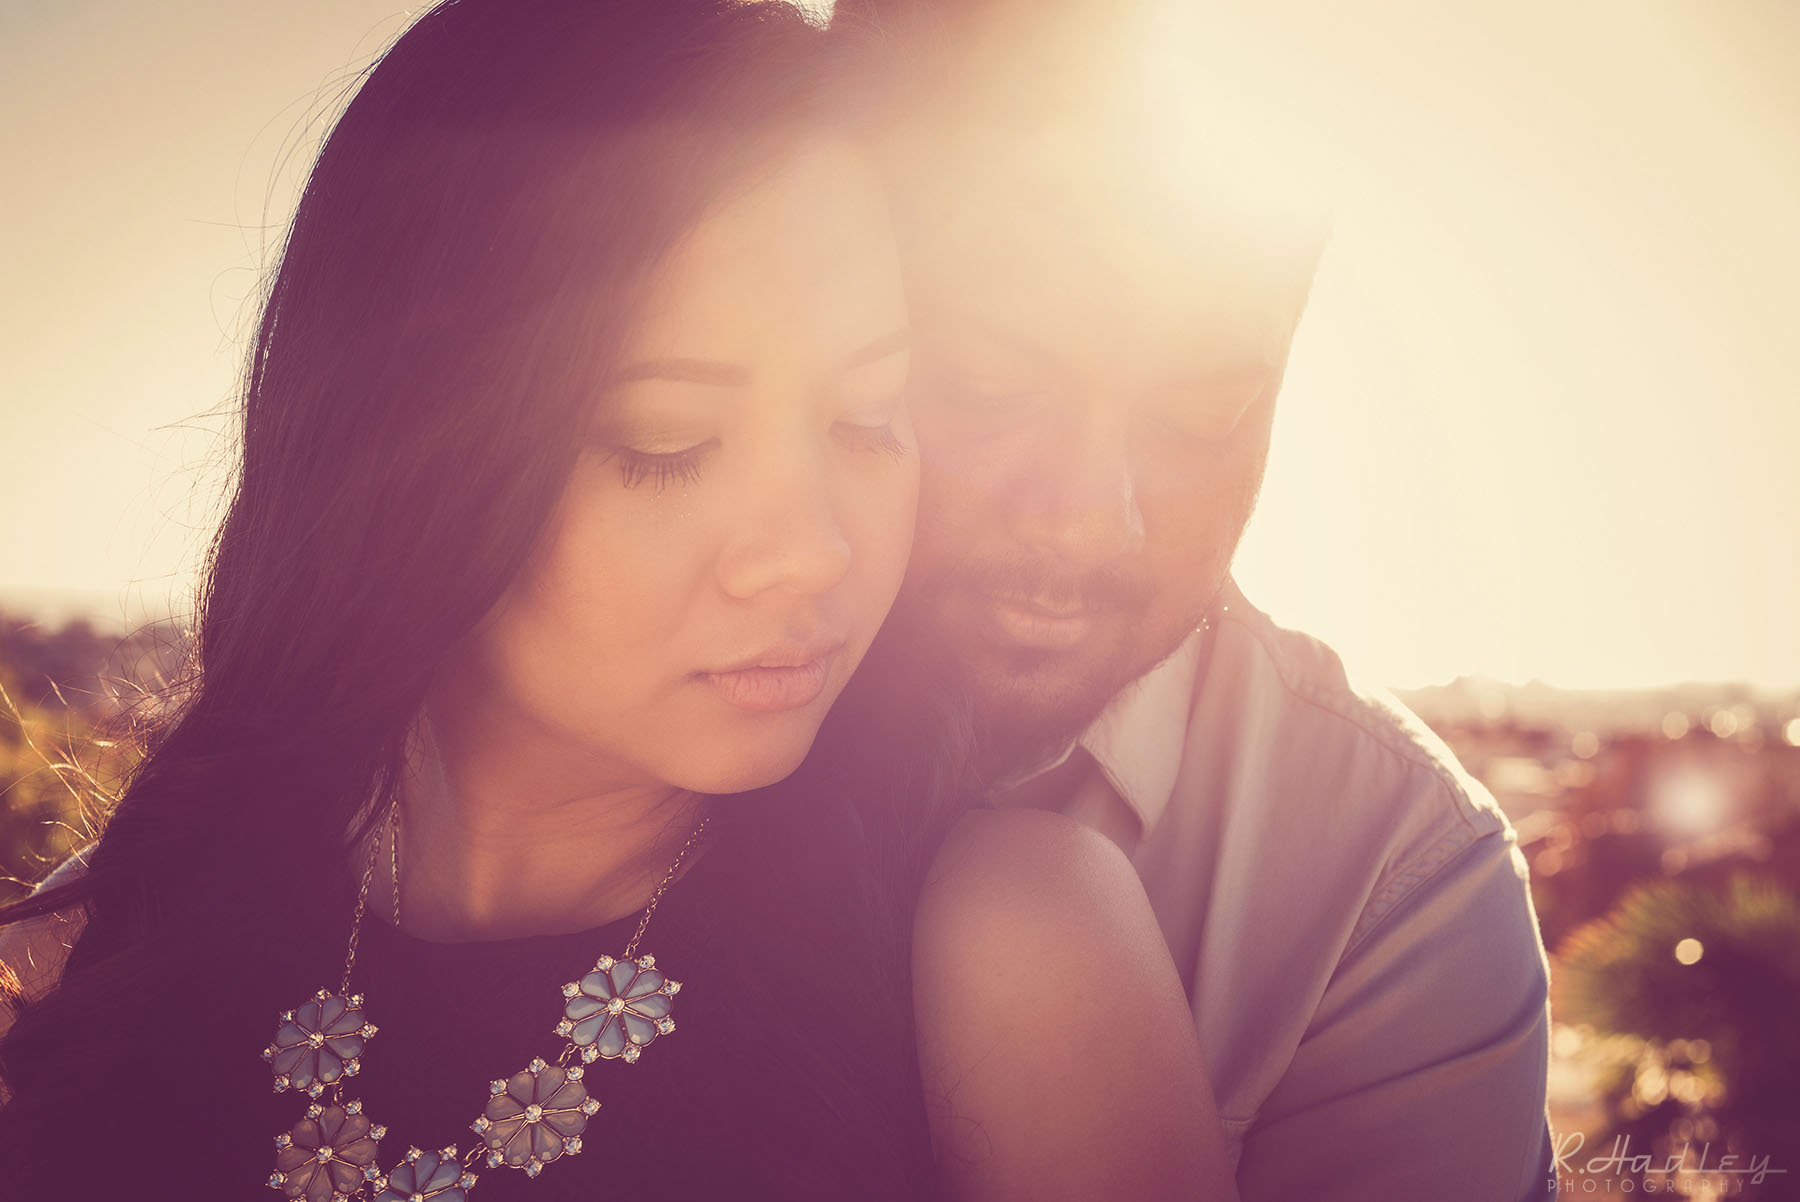 Engagement photo shoot in Park Guell, Barcelona